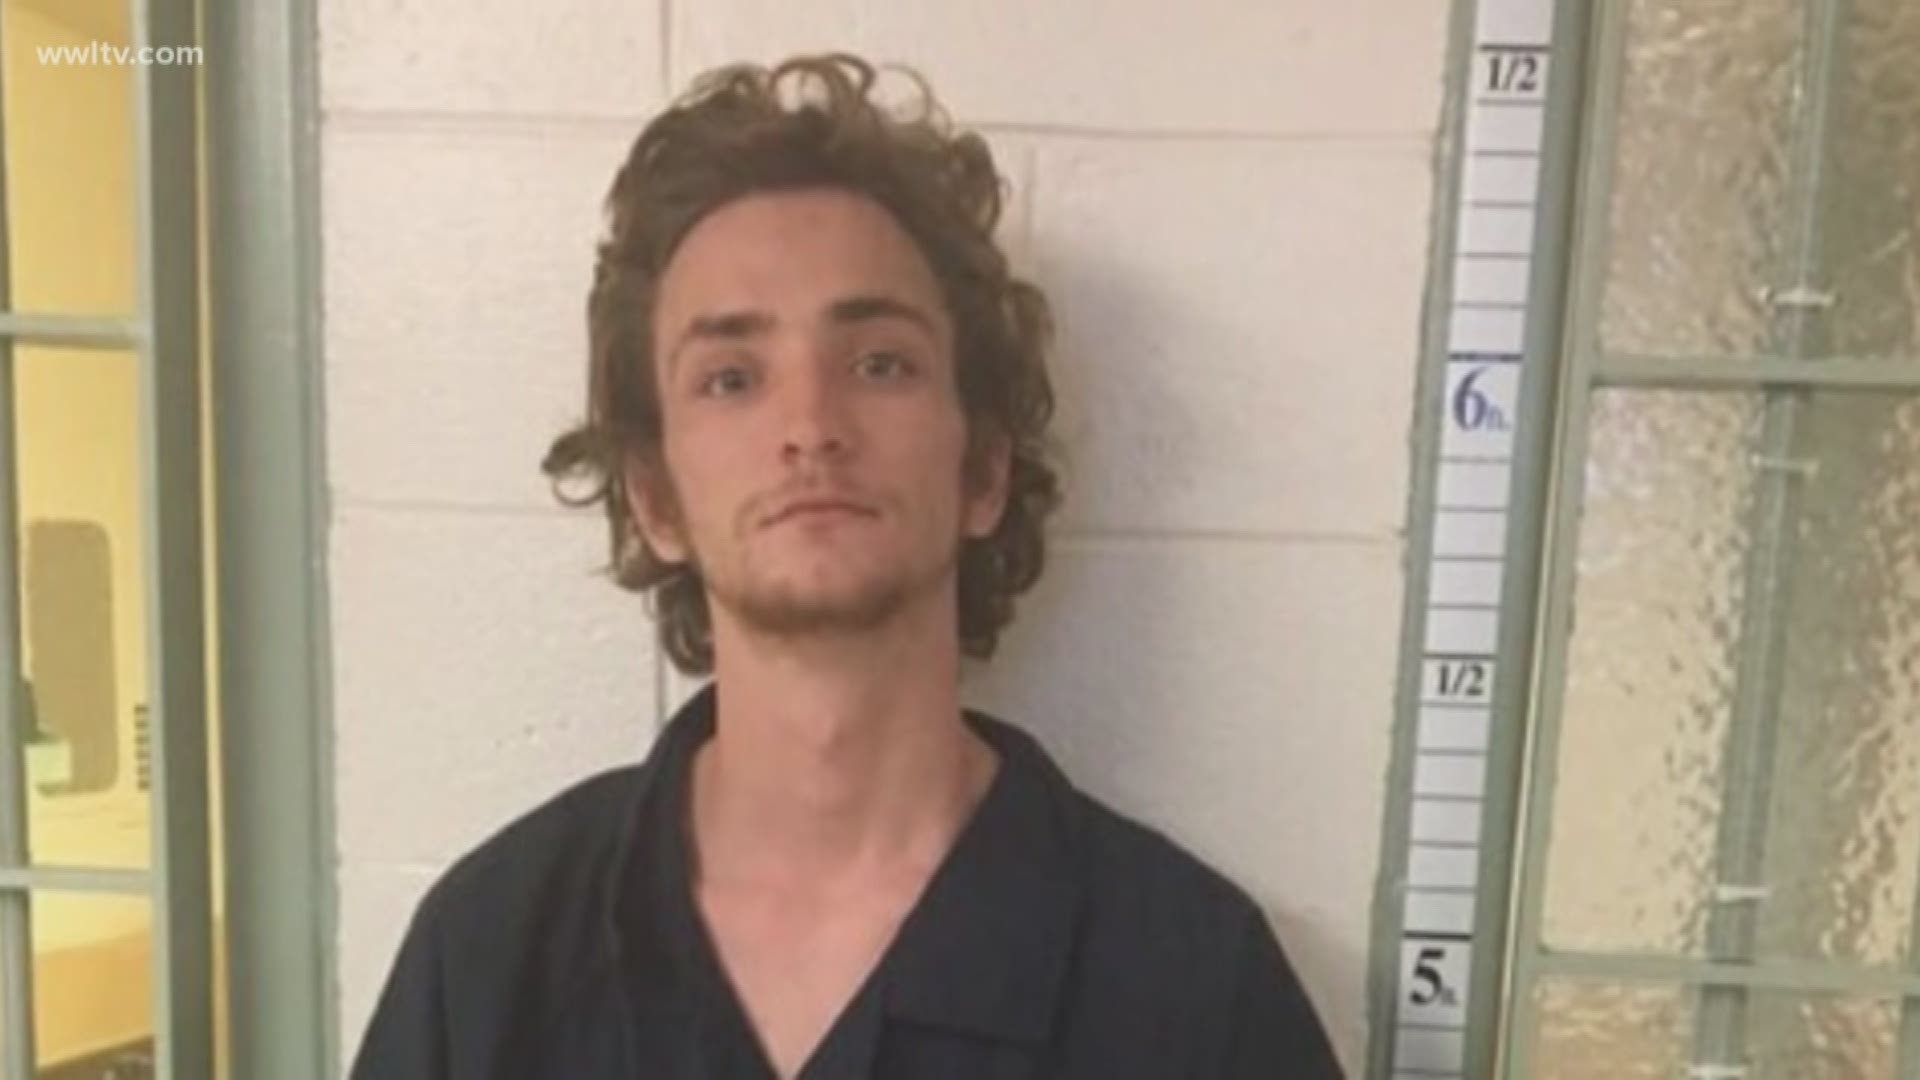 District Attorney Scott Perrilloux said he would pursue the death penalty against 21-year-old Dakota Theriot.